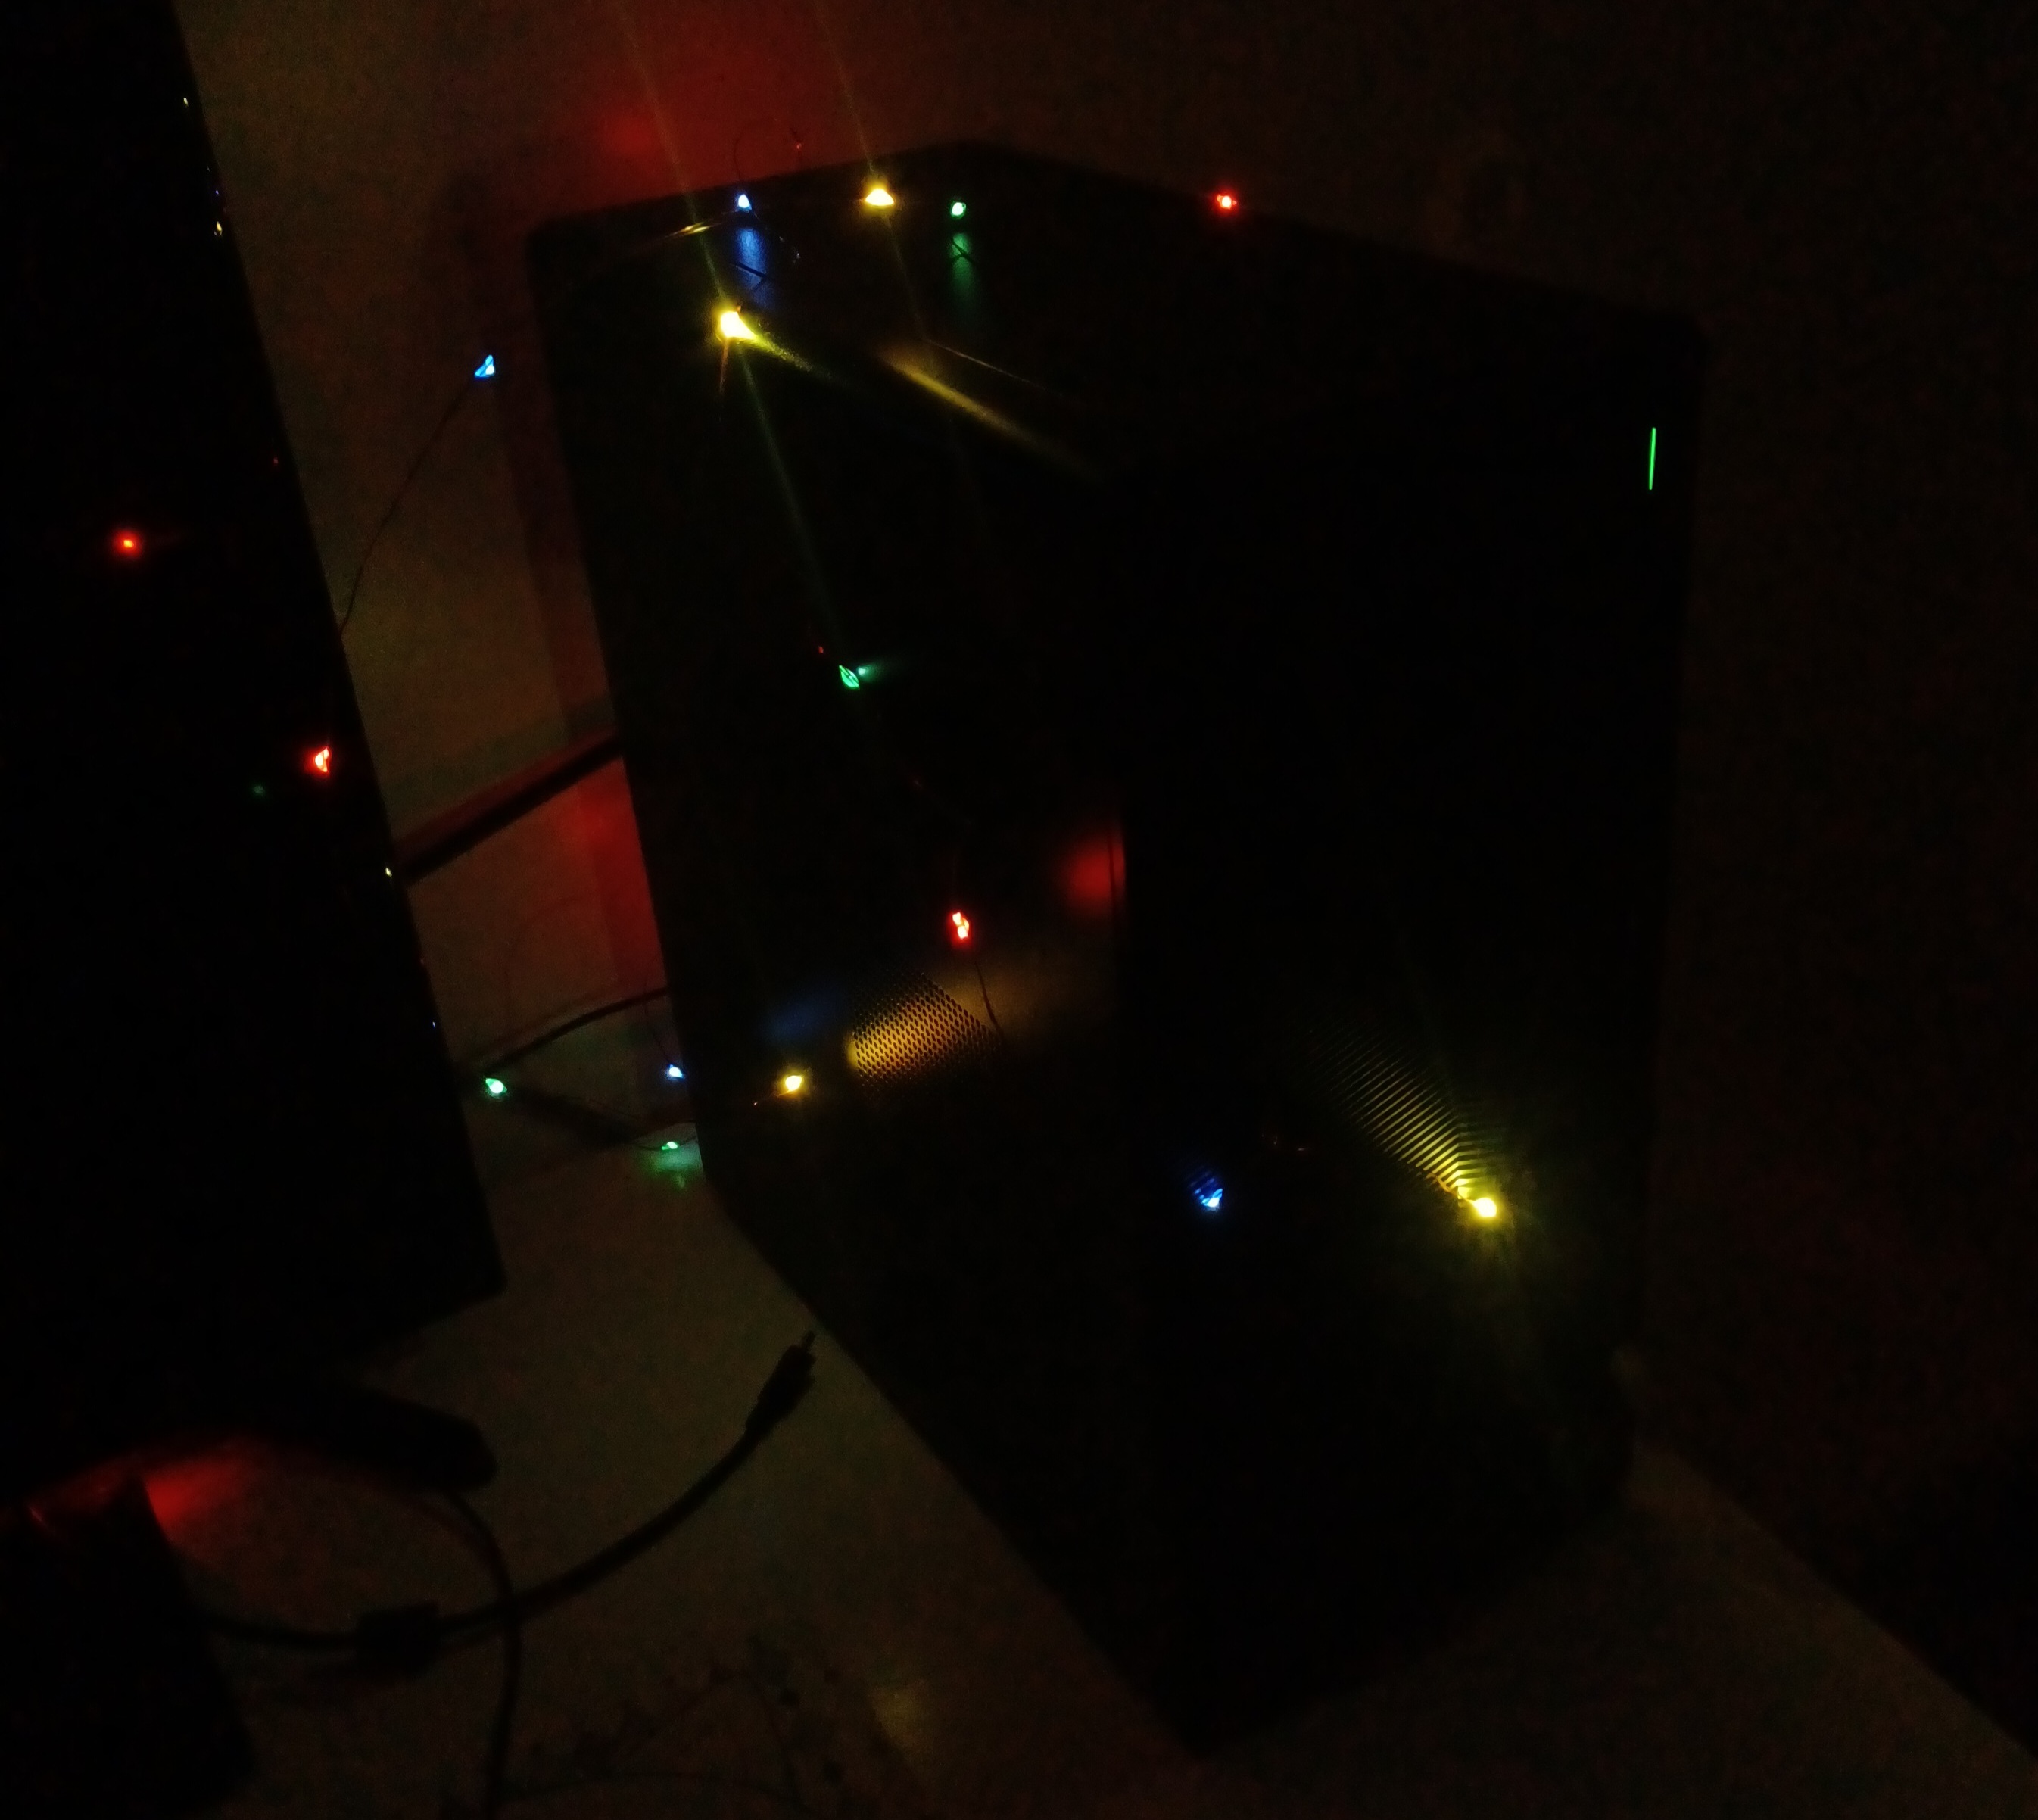 a photo of my desktop computer, tessa, with colorful lights strung around her.